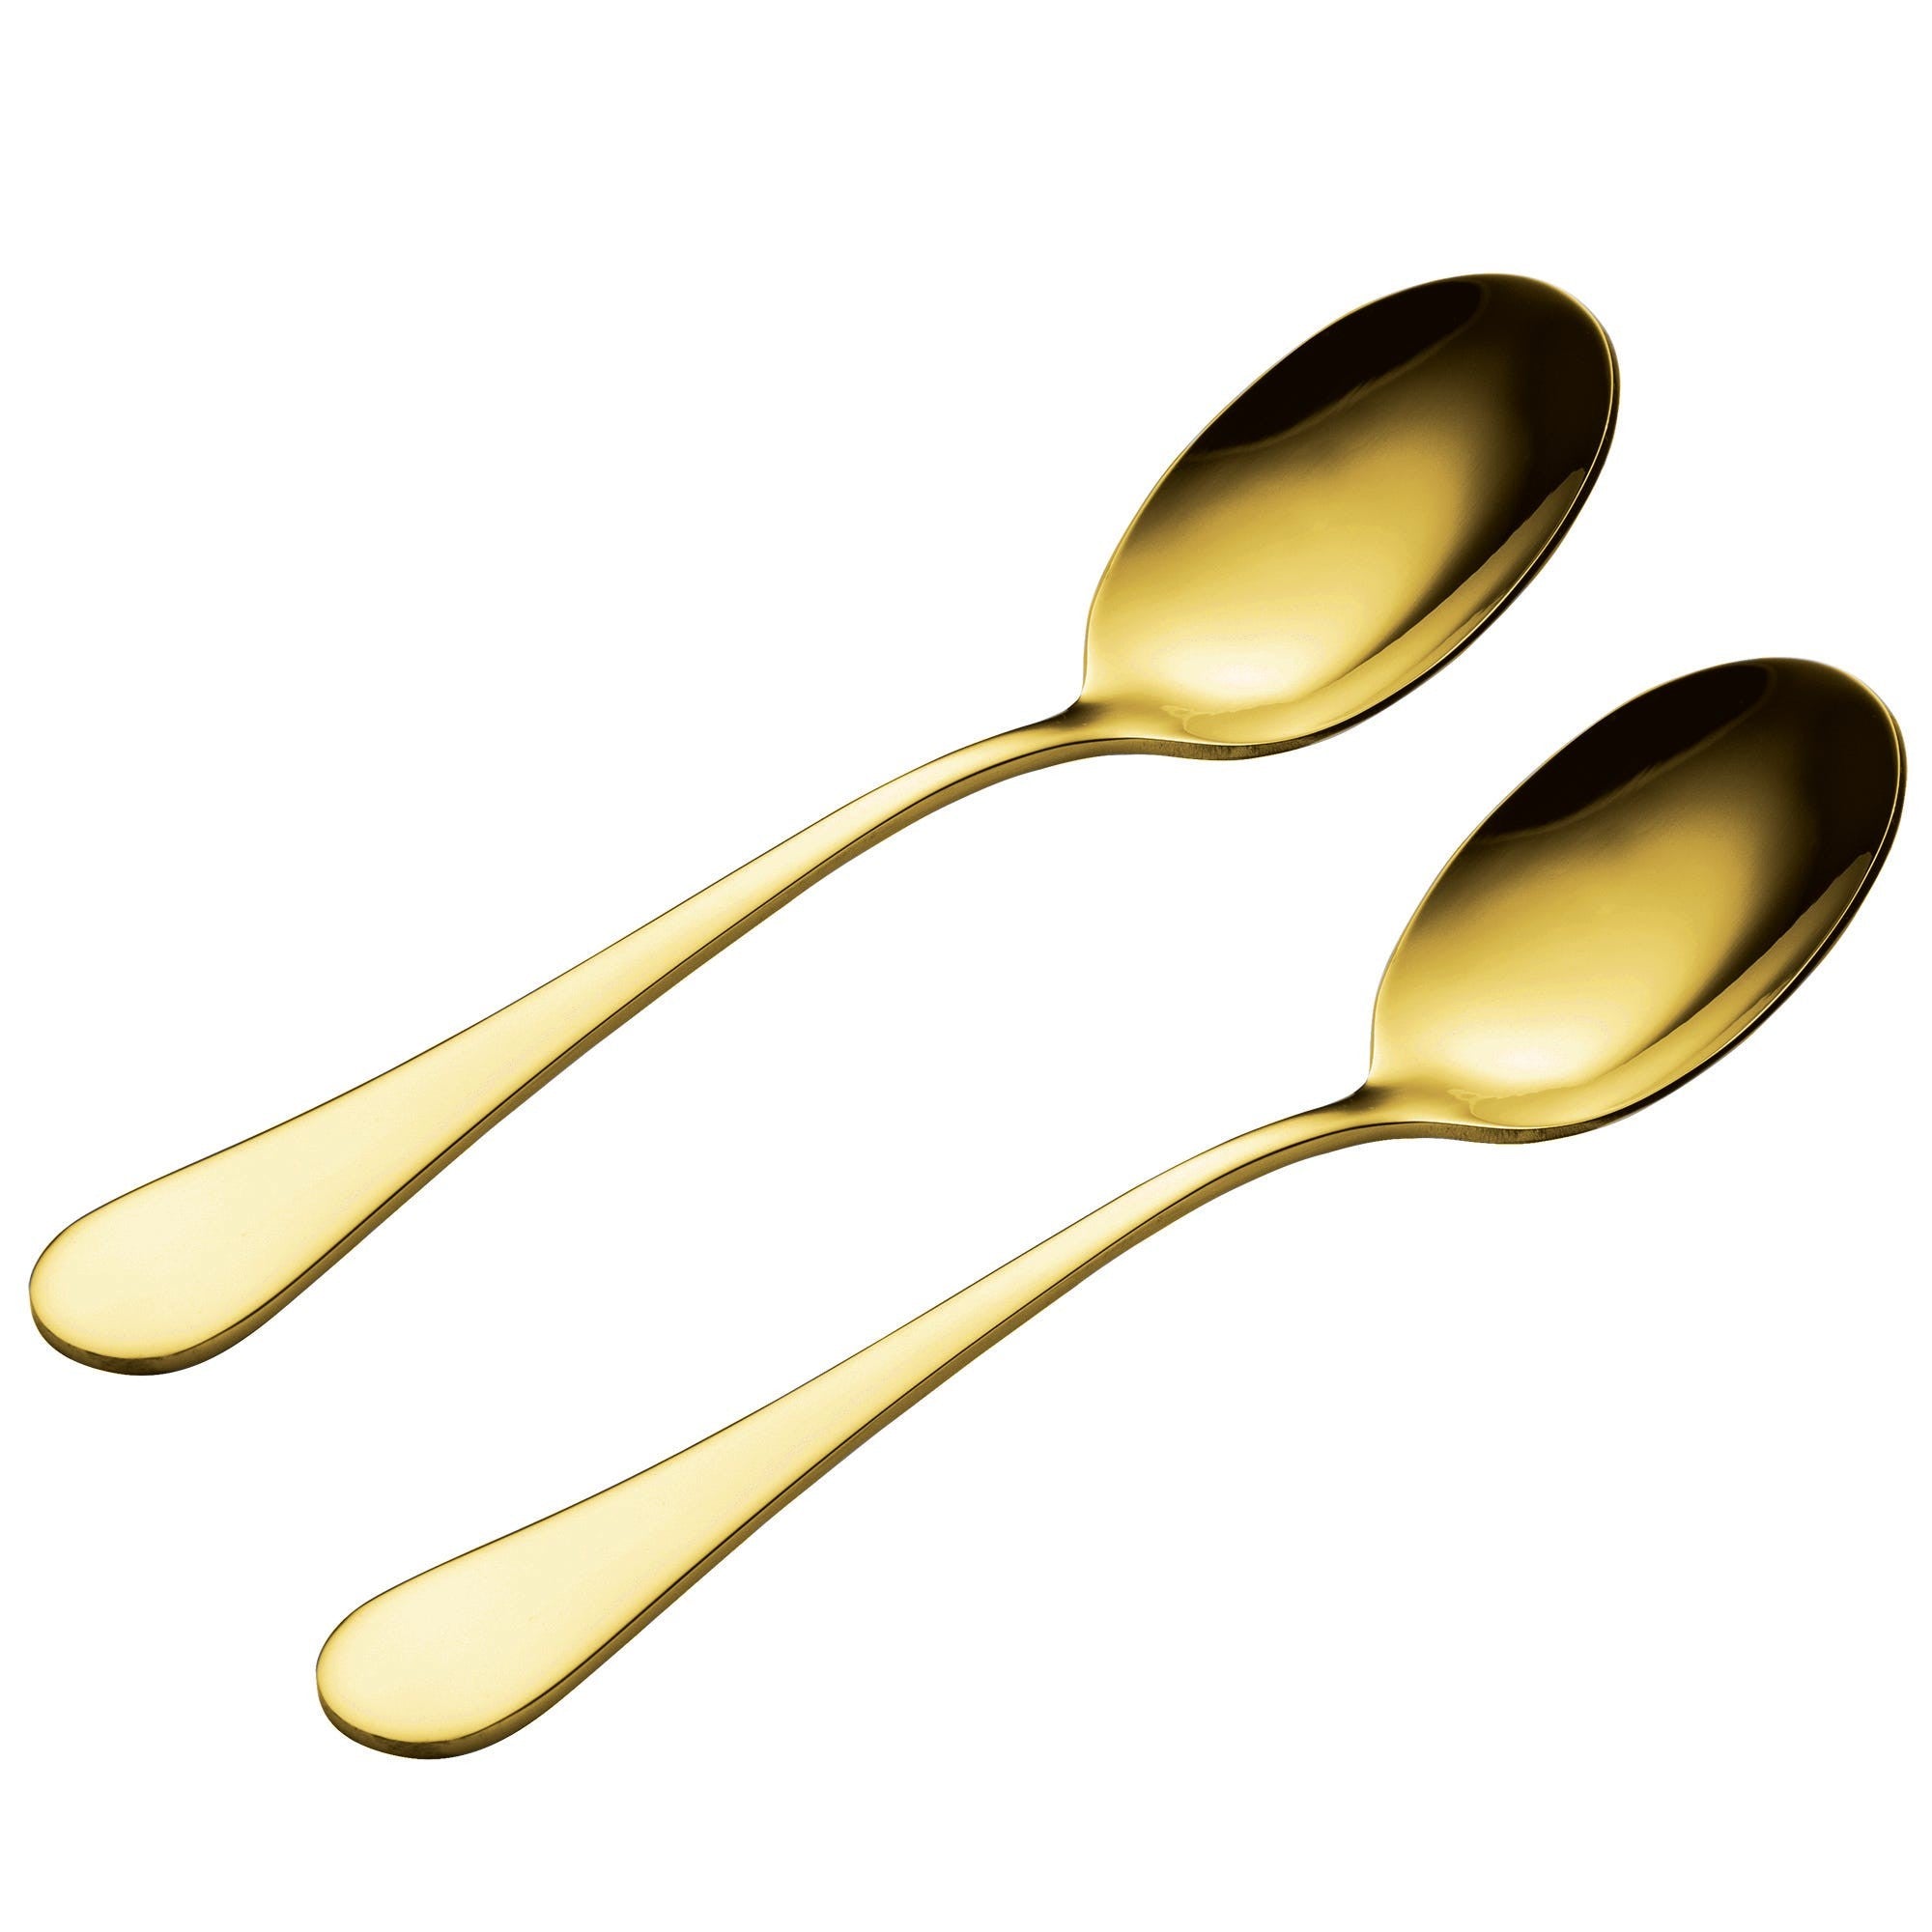 Photos - Cutlery Set Viners Select Gold 2 Piece Serving Spoons Giftbox 0304.081 0304.081 